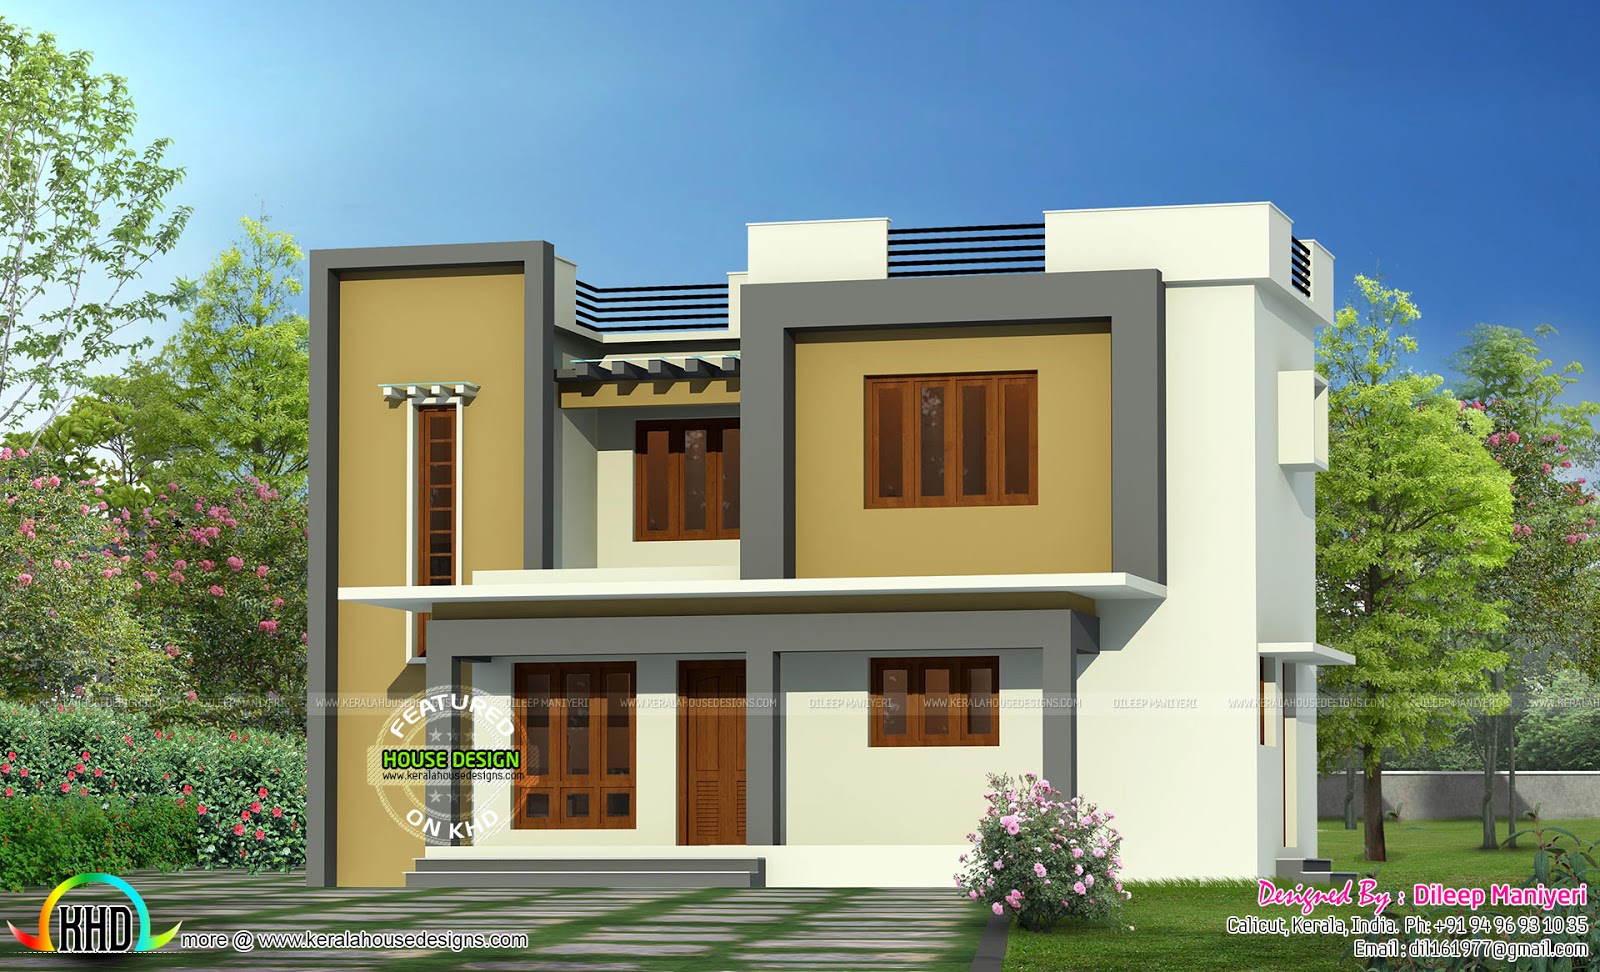  Simple  Flat  Roof  House  Designs  Modern House 